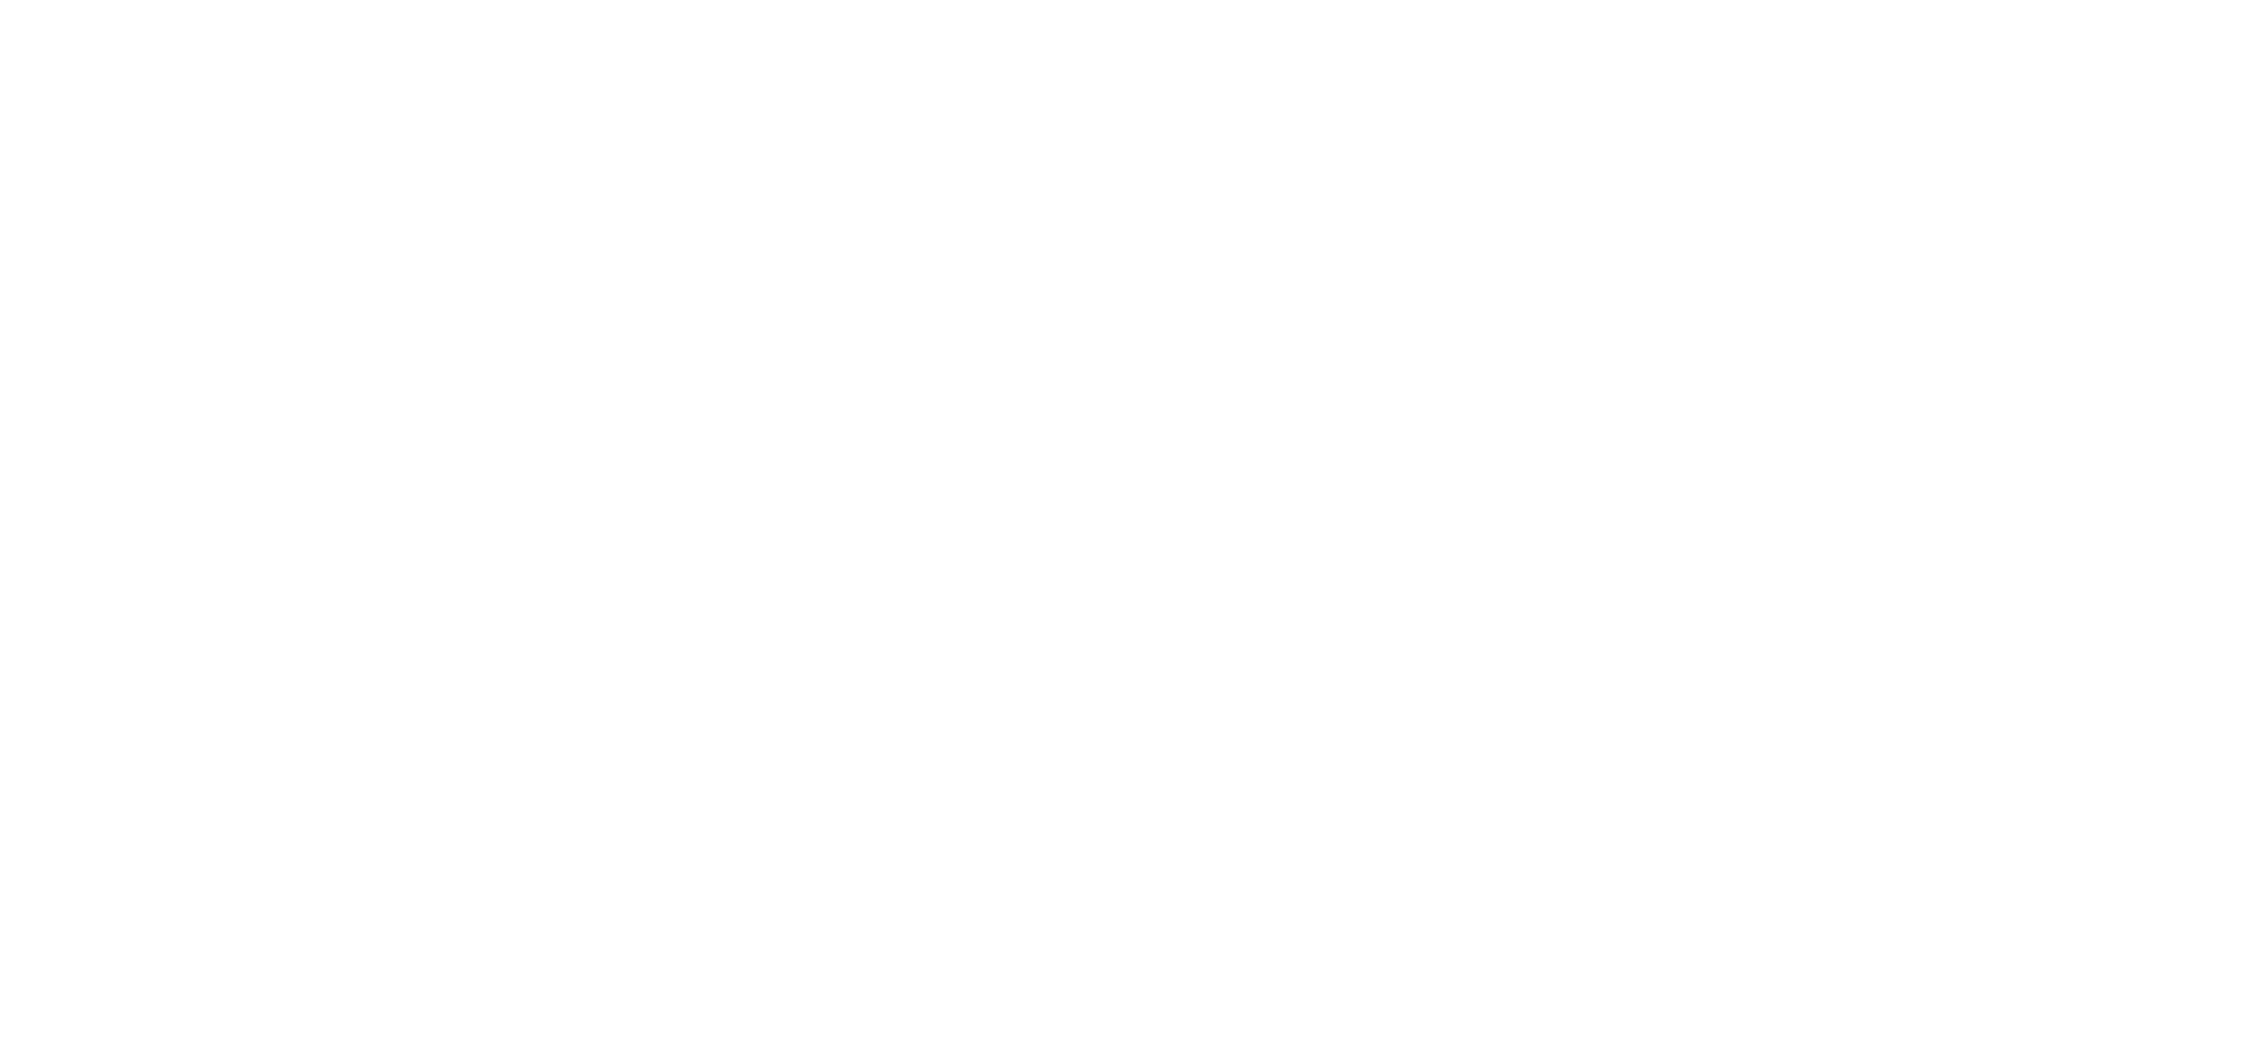 Transactions by Stripe